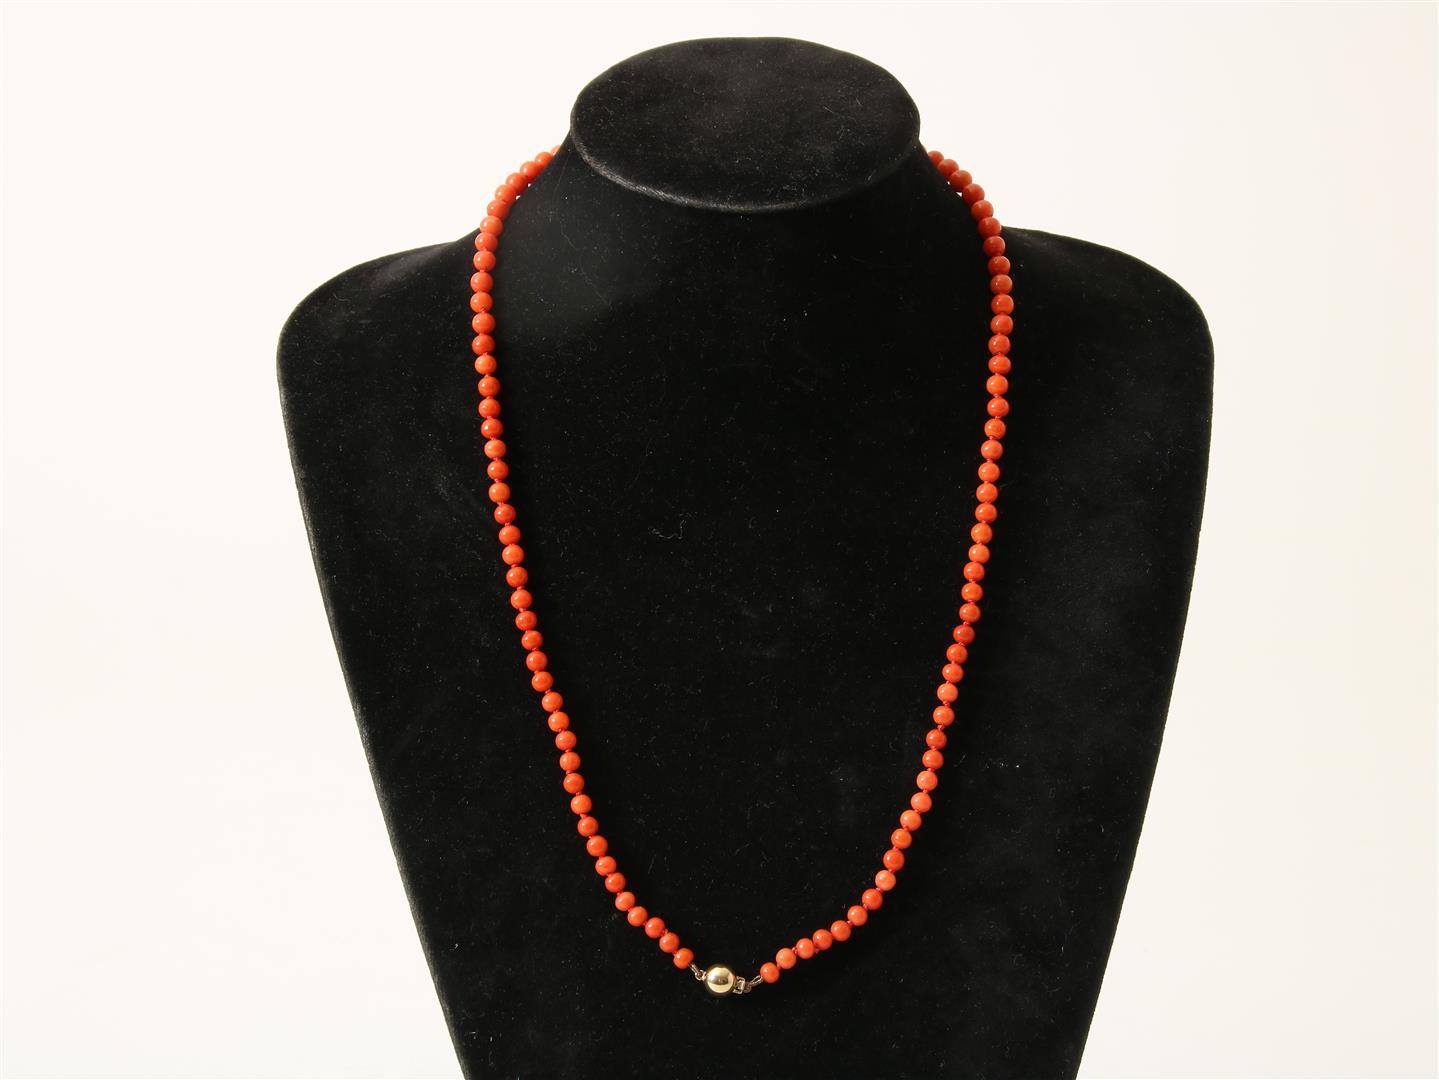 Red coral knotted bead necklace on gold ball clasp, l. 60 cm. - Image 2 of 2